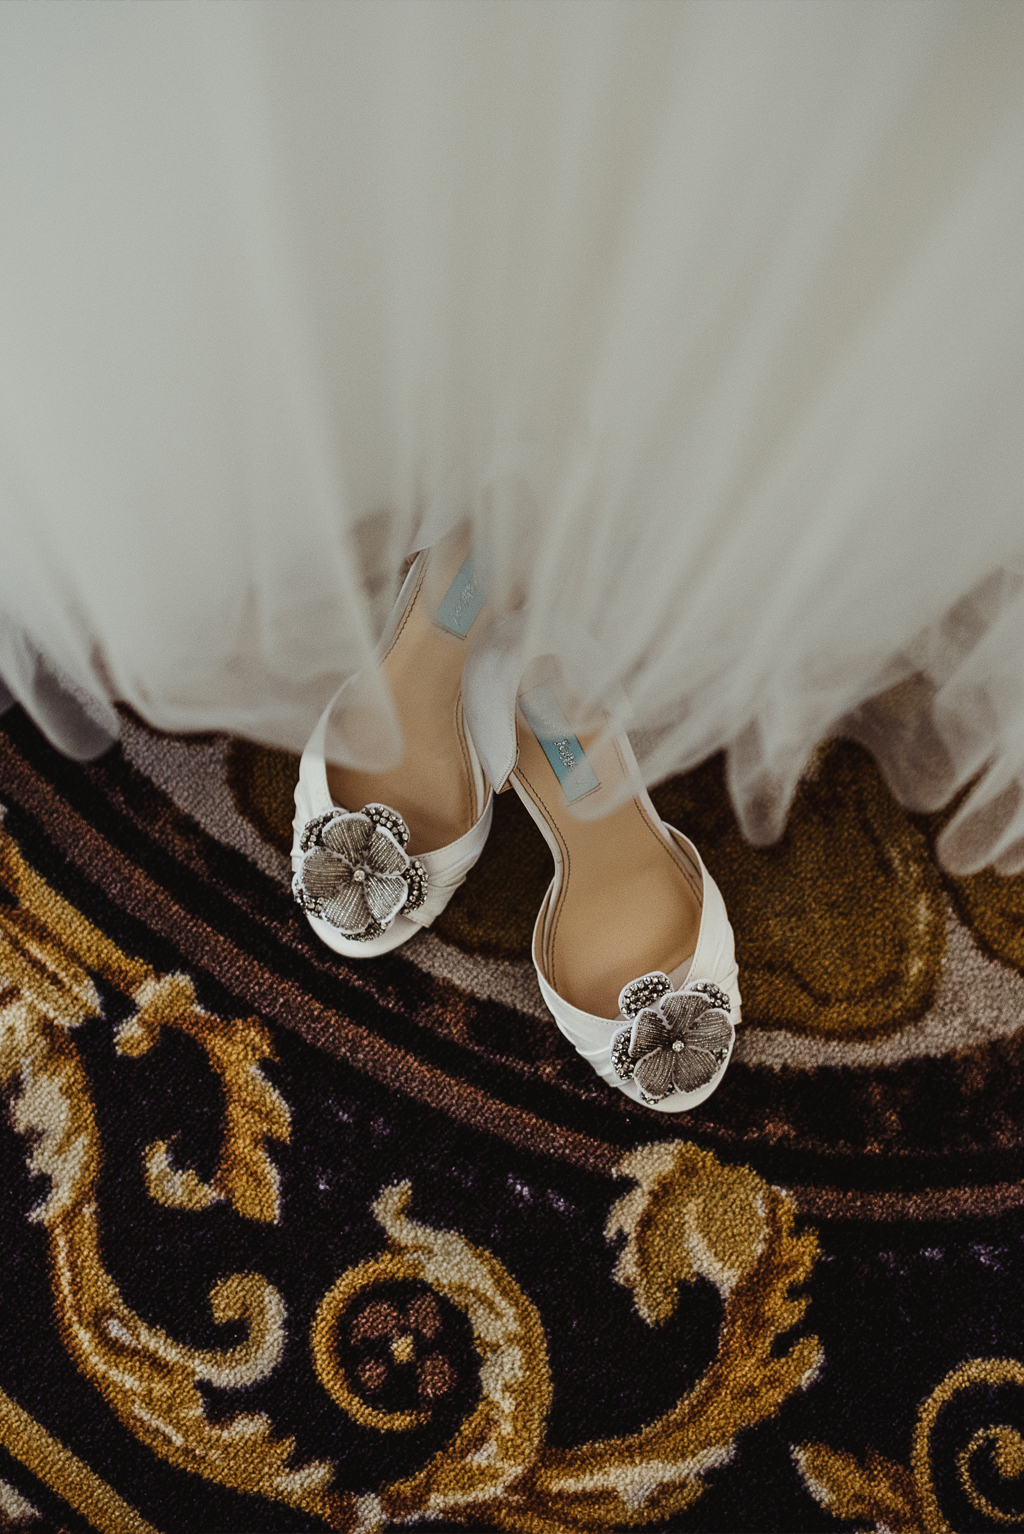 Timeless Love Weddings | Enchanted Inspirational wedding | Bridal gown & shoes